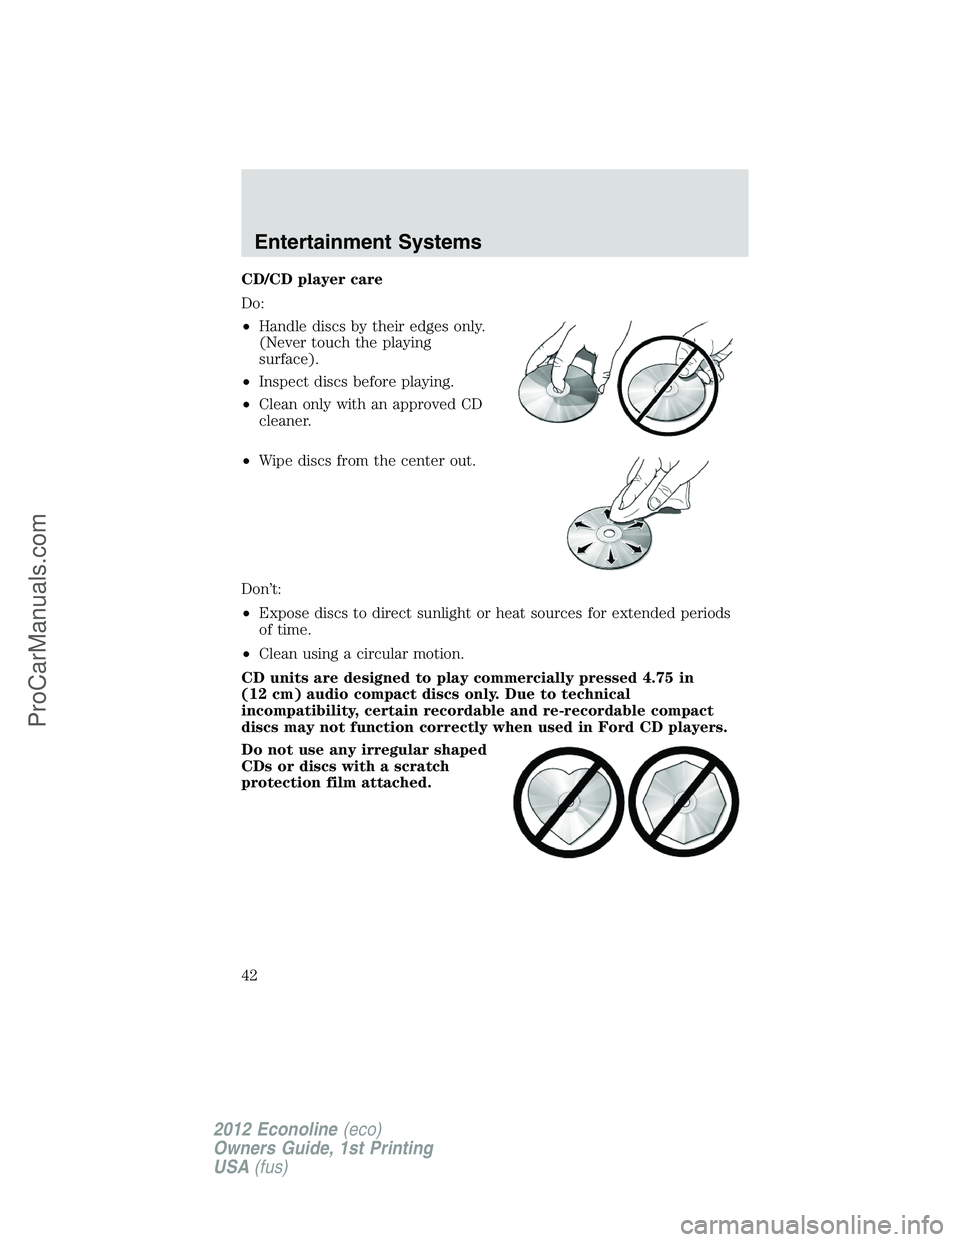 FORD E-350 2012 Service Manual CD/CD player care
Do:
•Handle discs by their edges only.
(Never touch the playing
surface).
•Inspect discs before playing.
•Clean only with an approved CD
cleaner.
•Wipe discs from the center 